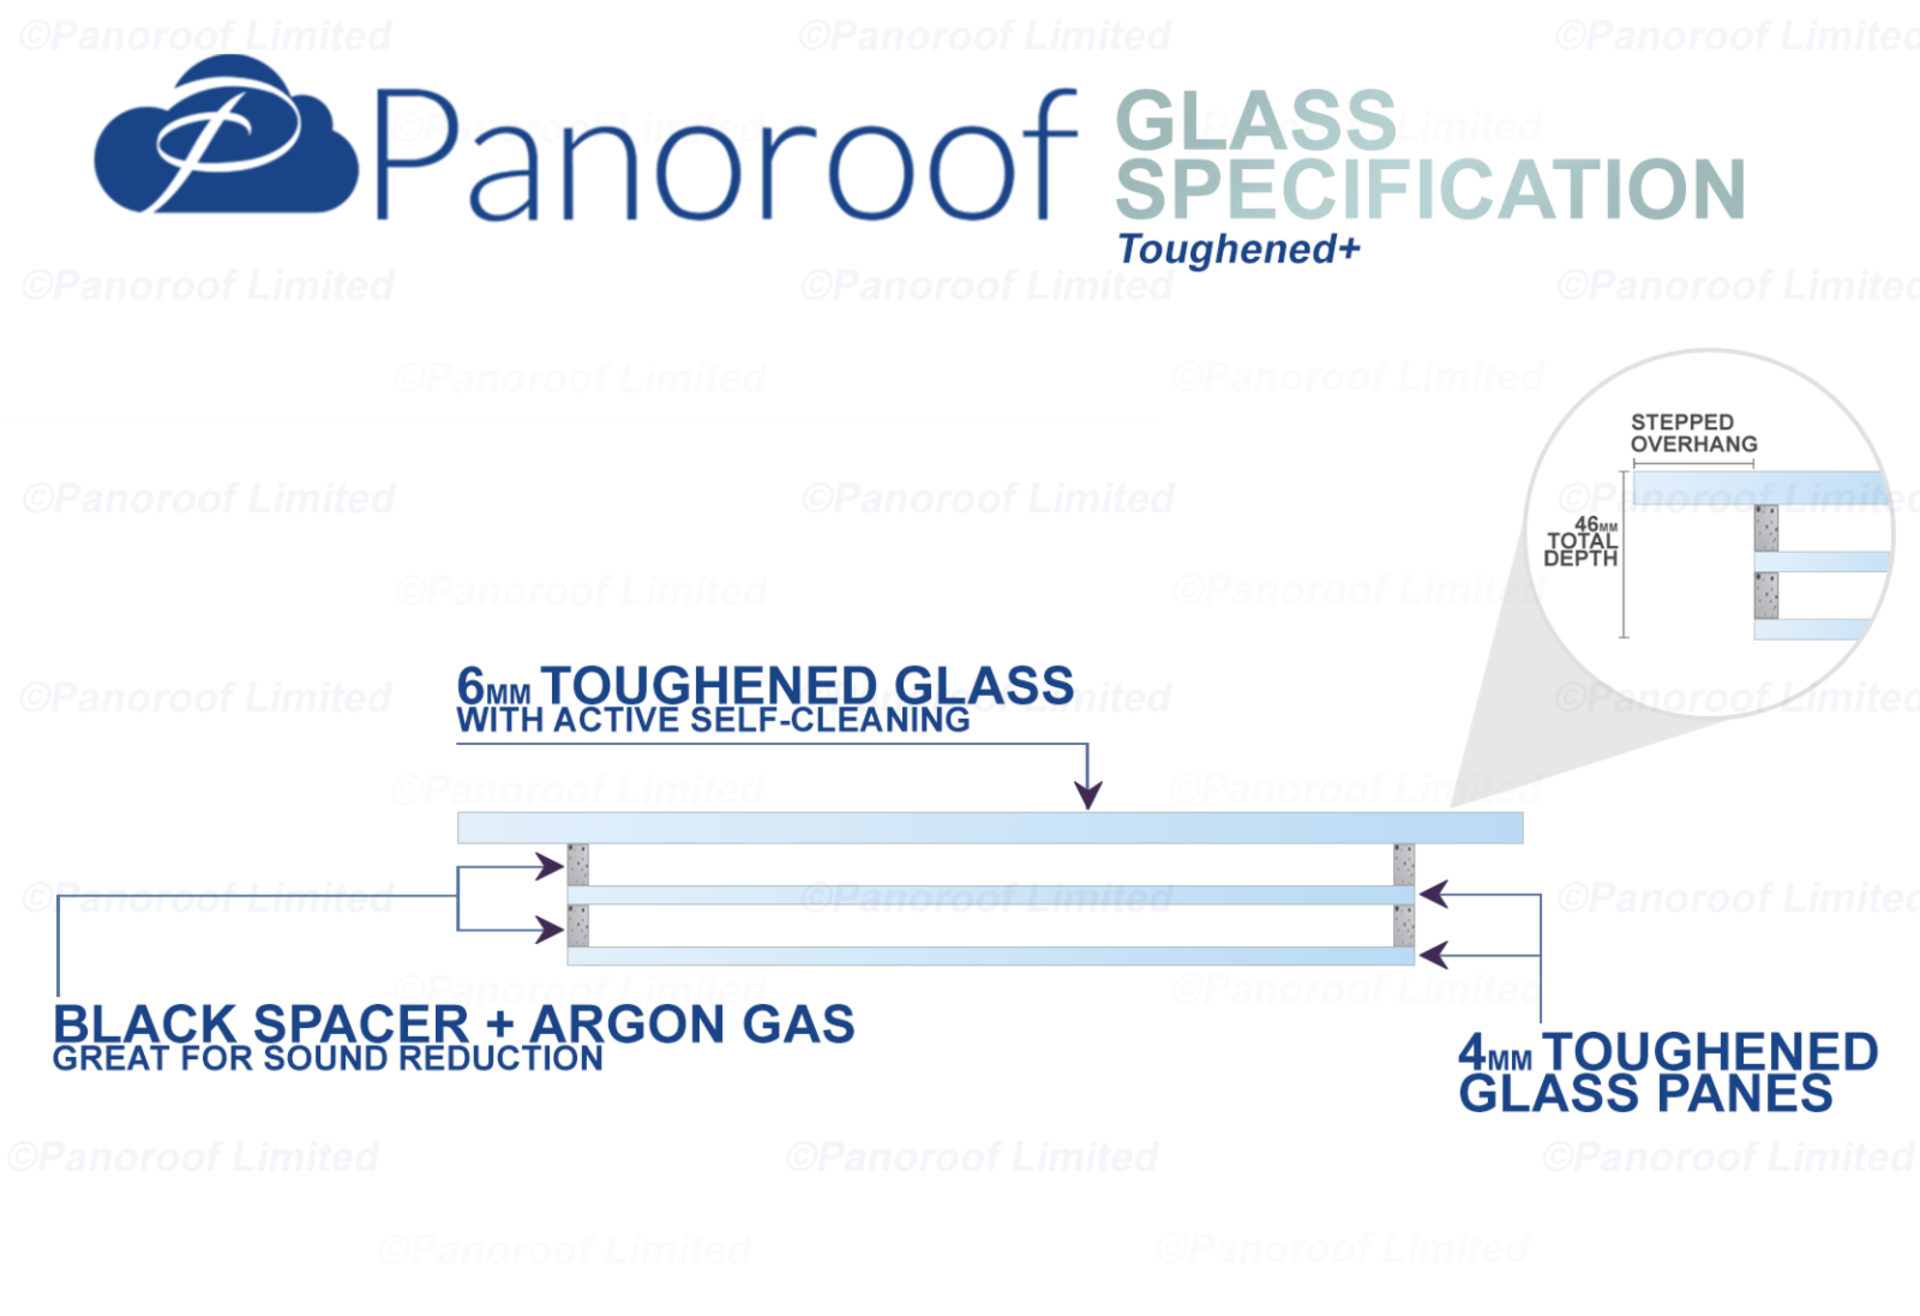 """Panoroof Triple Glazed Self Cleaning 400x400mm (inside Size Visable glass area) Seamless Glass - Image 4 of 6